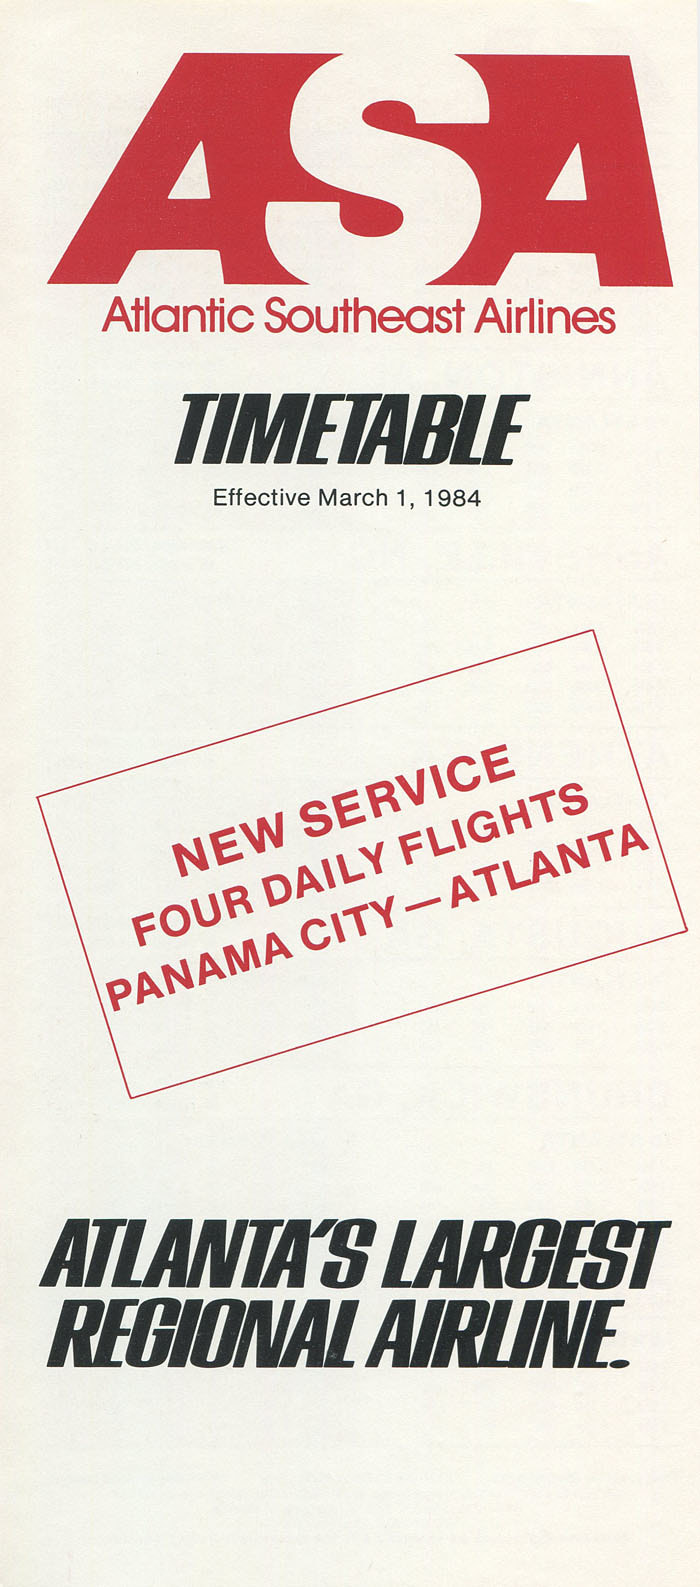 Atlantic Southeast Airlines timetable